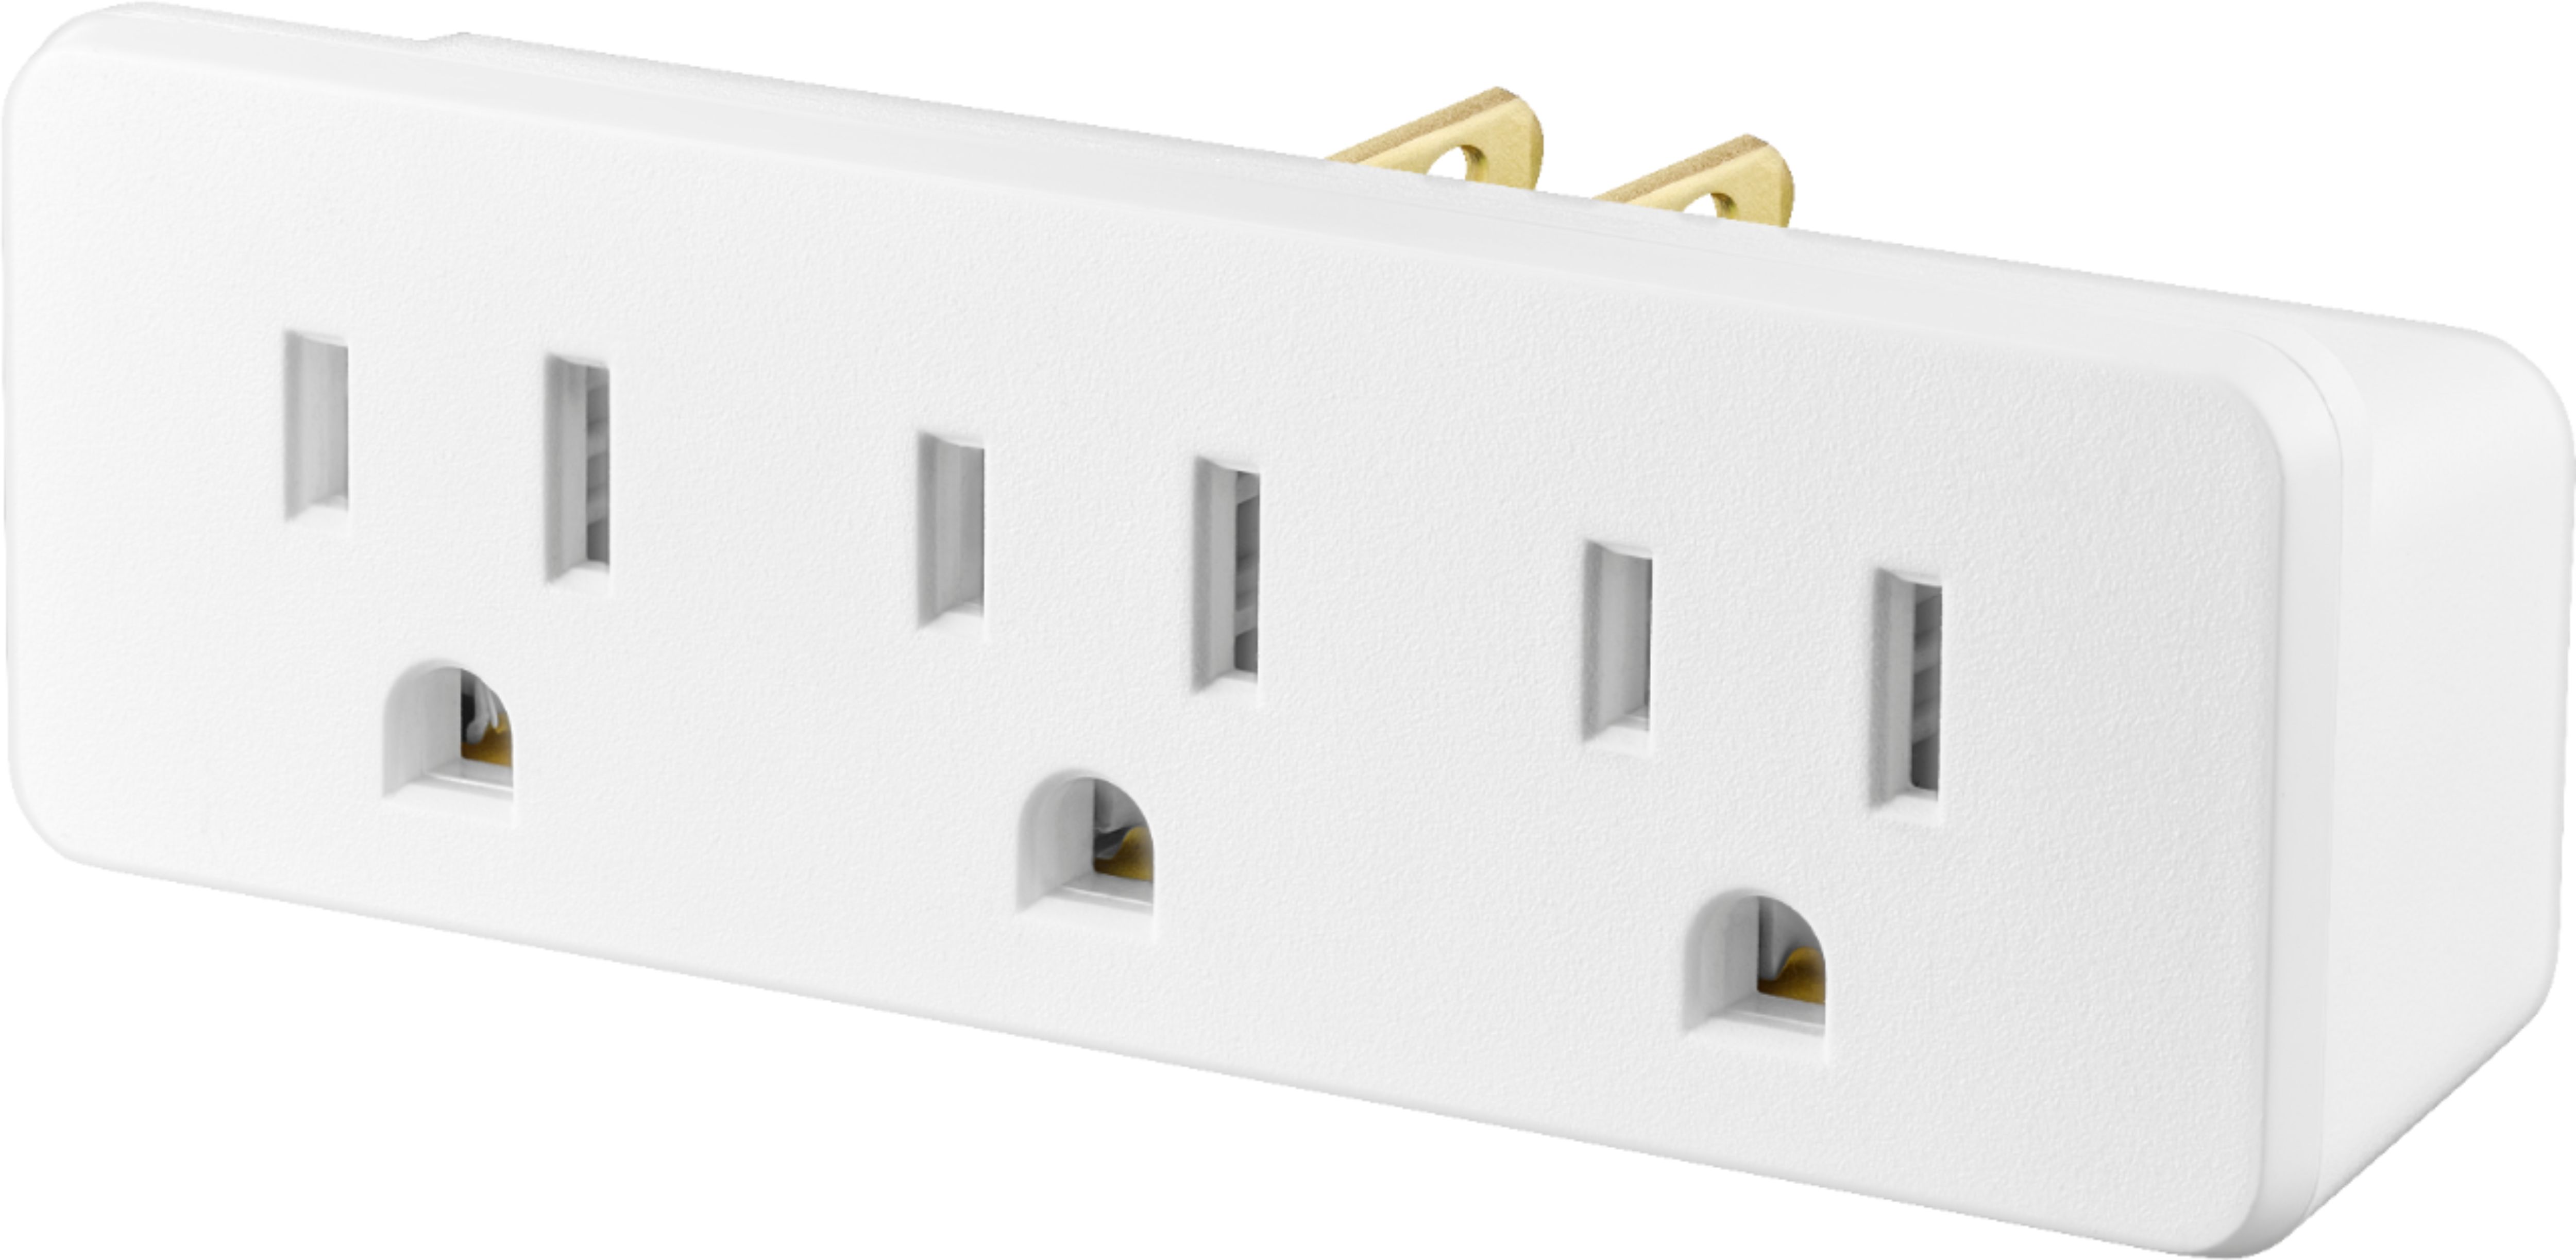 Insignia™ 3-Plug Outlet Extender White NS-PWRT3XT - Best Buy